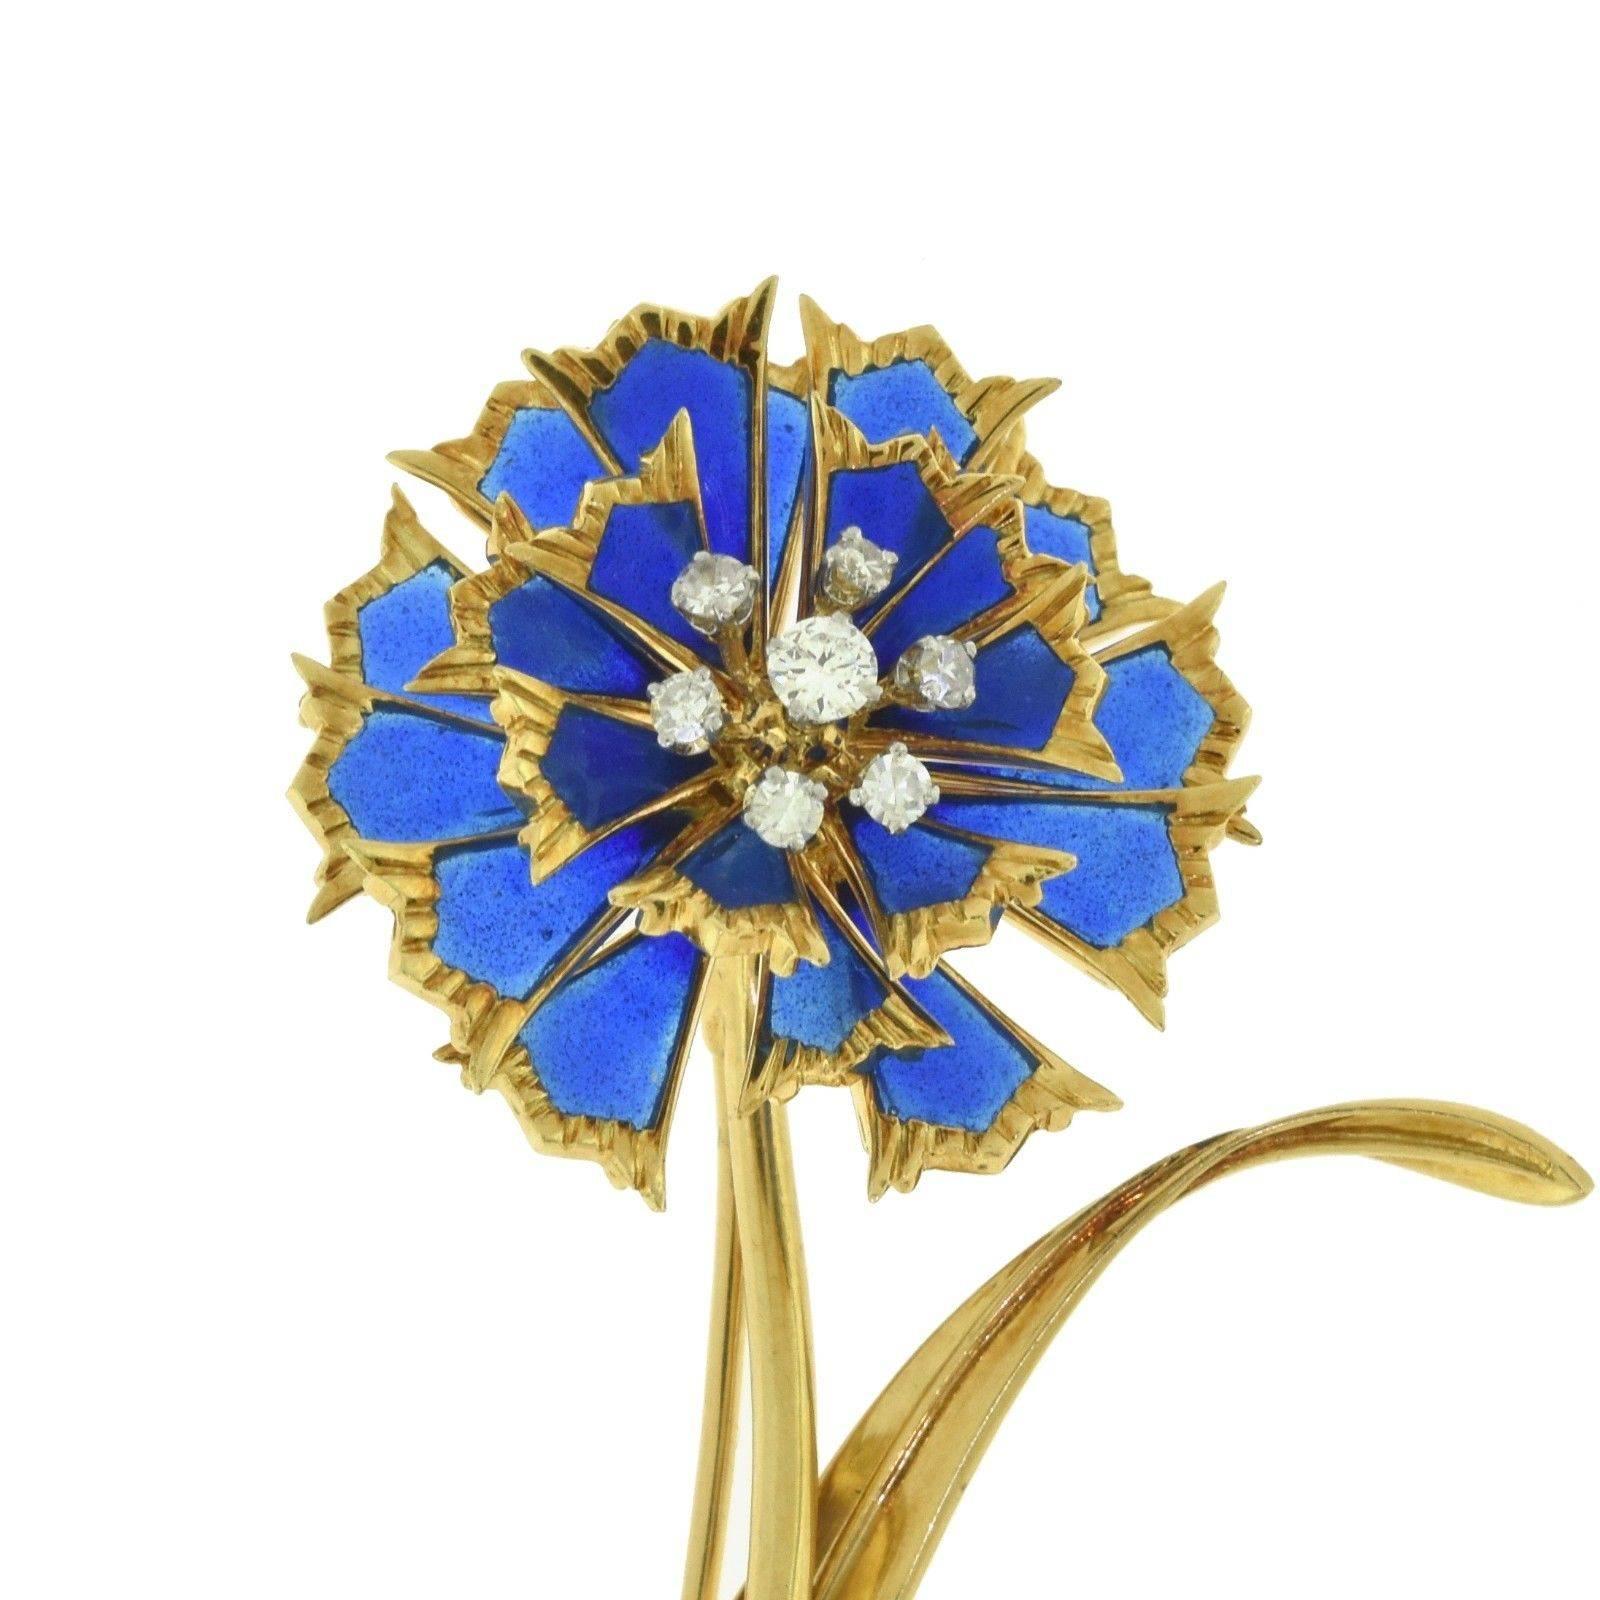 Style: Plique-a-Jour Brooch / Pin
Metal: Yellow Gold
Metal Purity: 18k
Non-Metal Material: Blue Enamel 
Stones: 7 Round Diamonds
Total Carat Weight: 0.45 ct
Diamond Color: H
Diamond Clarity:  VS
Total Item Weight (g): 13.7
Flower Diameter:  approx.